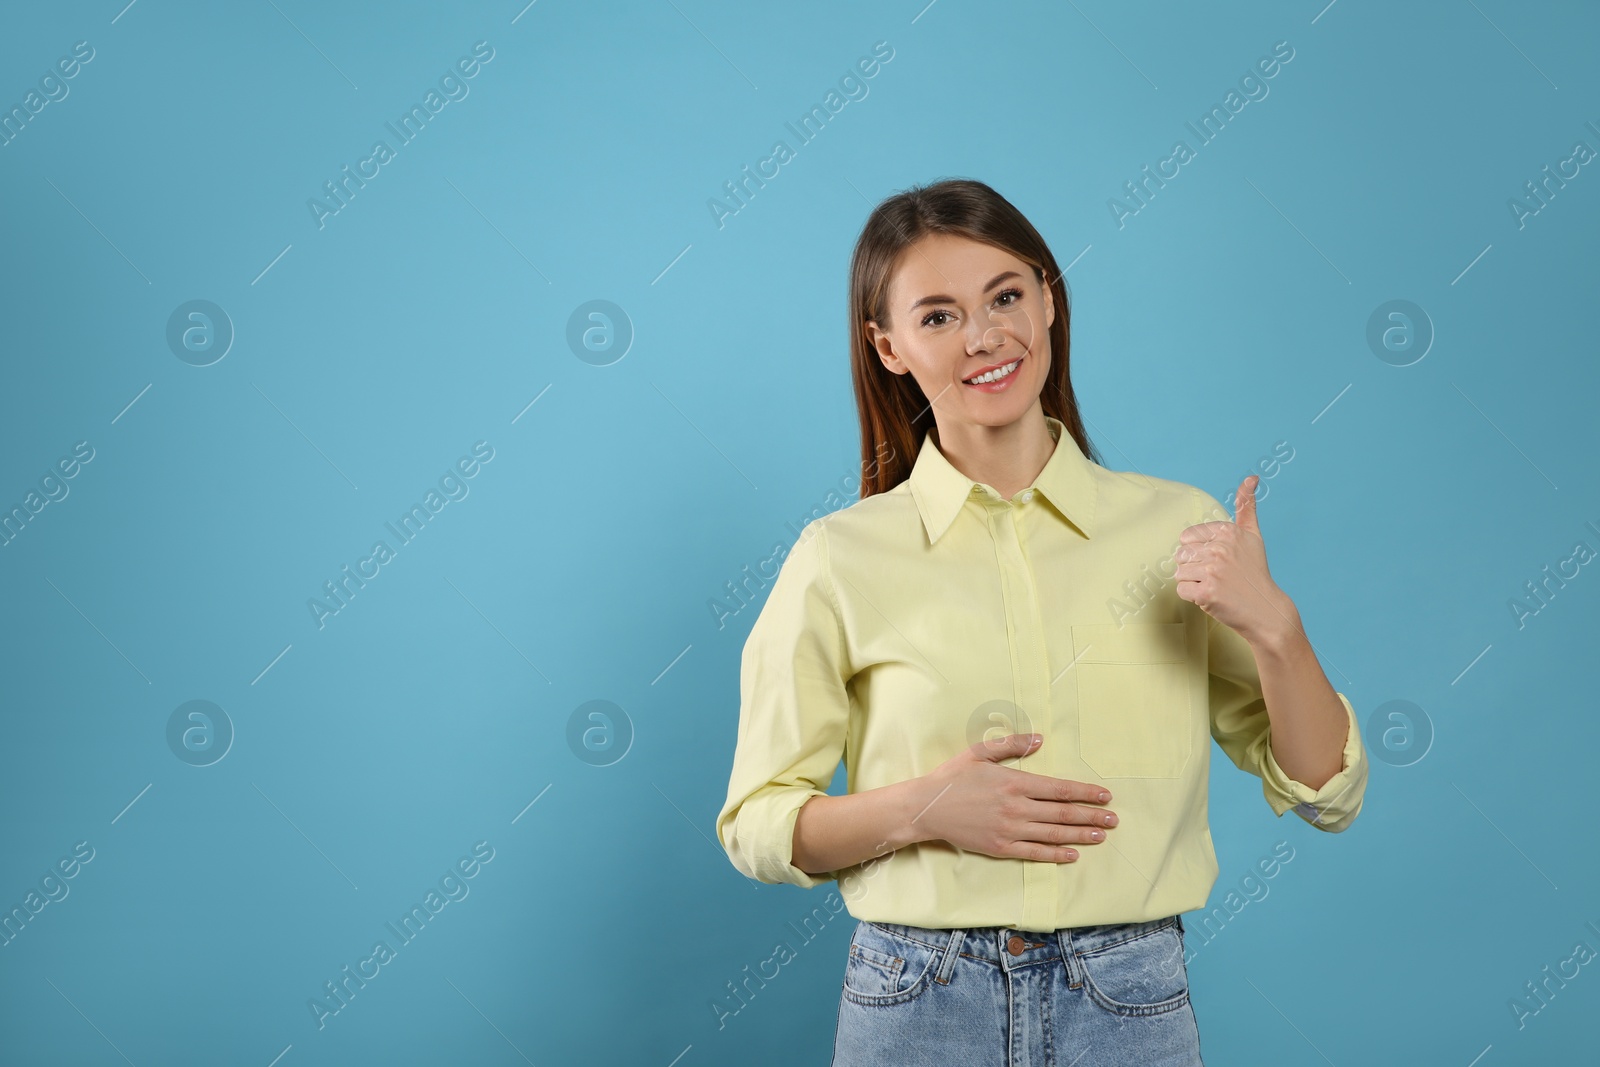 Photo of Healthy woman holding hand on belly and showing thumbs up gesture against light blue background. Space for text